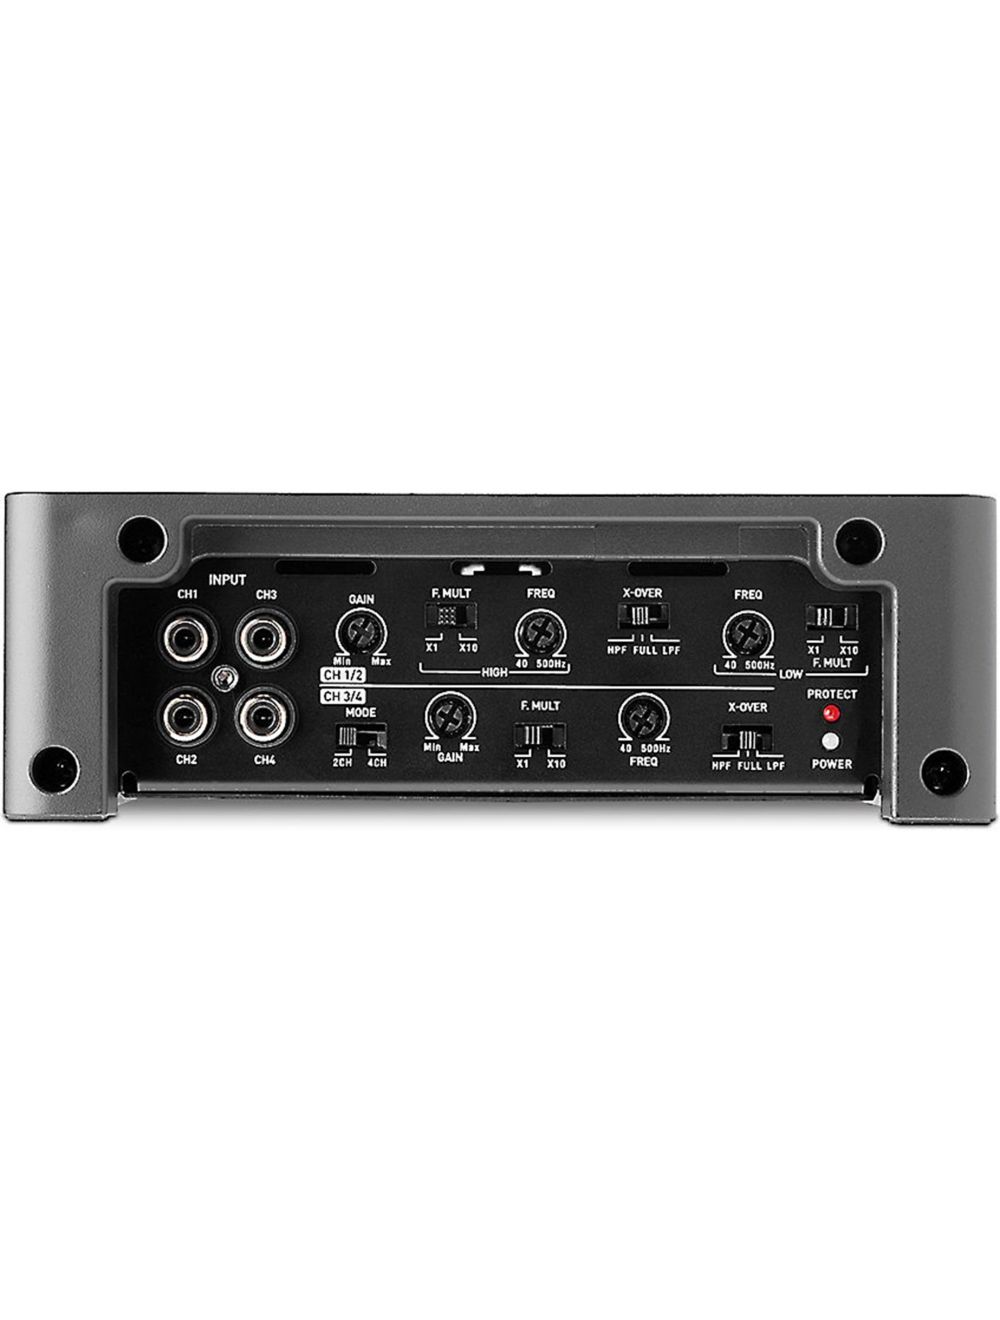 Focal FPX 4.400 SQ 4 Channel amplifier, 4 x 70 @ 4ohms, Class AB